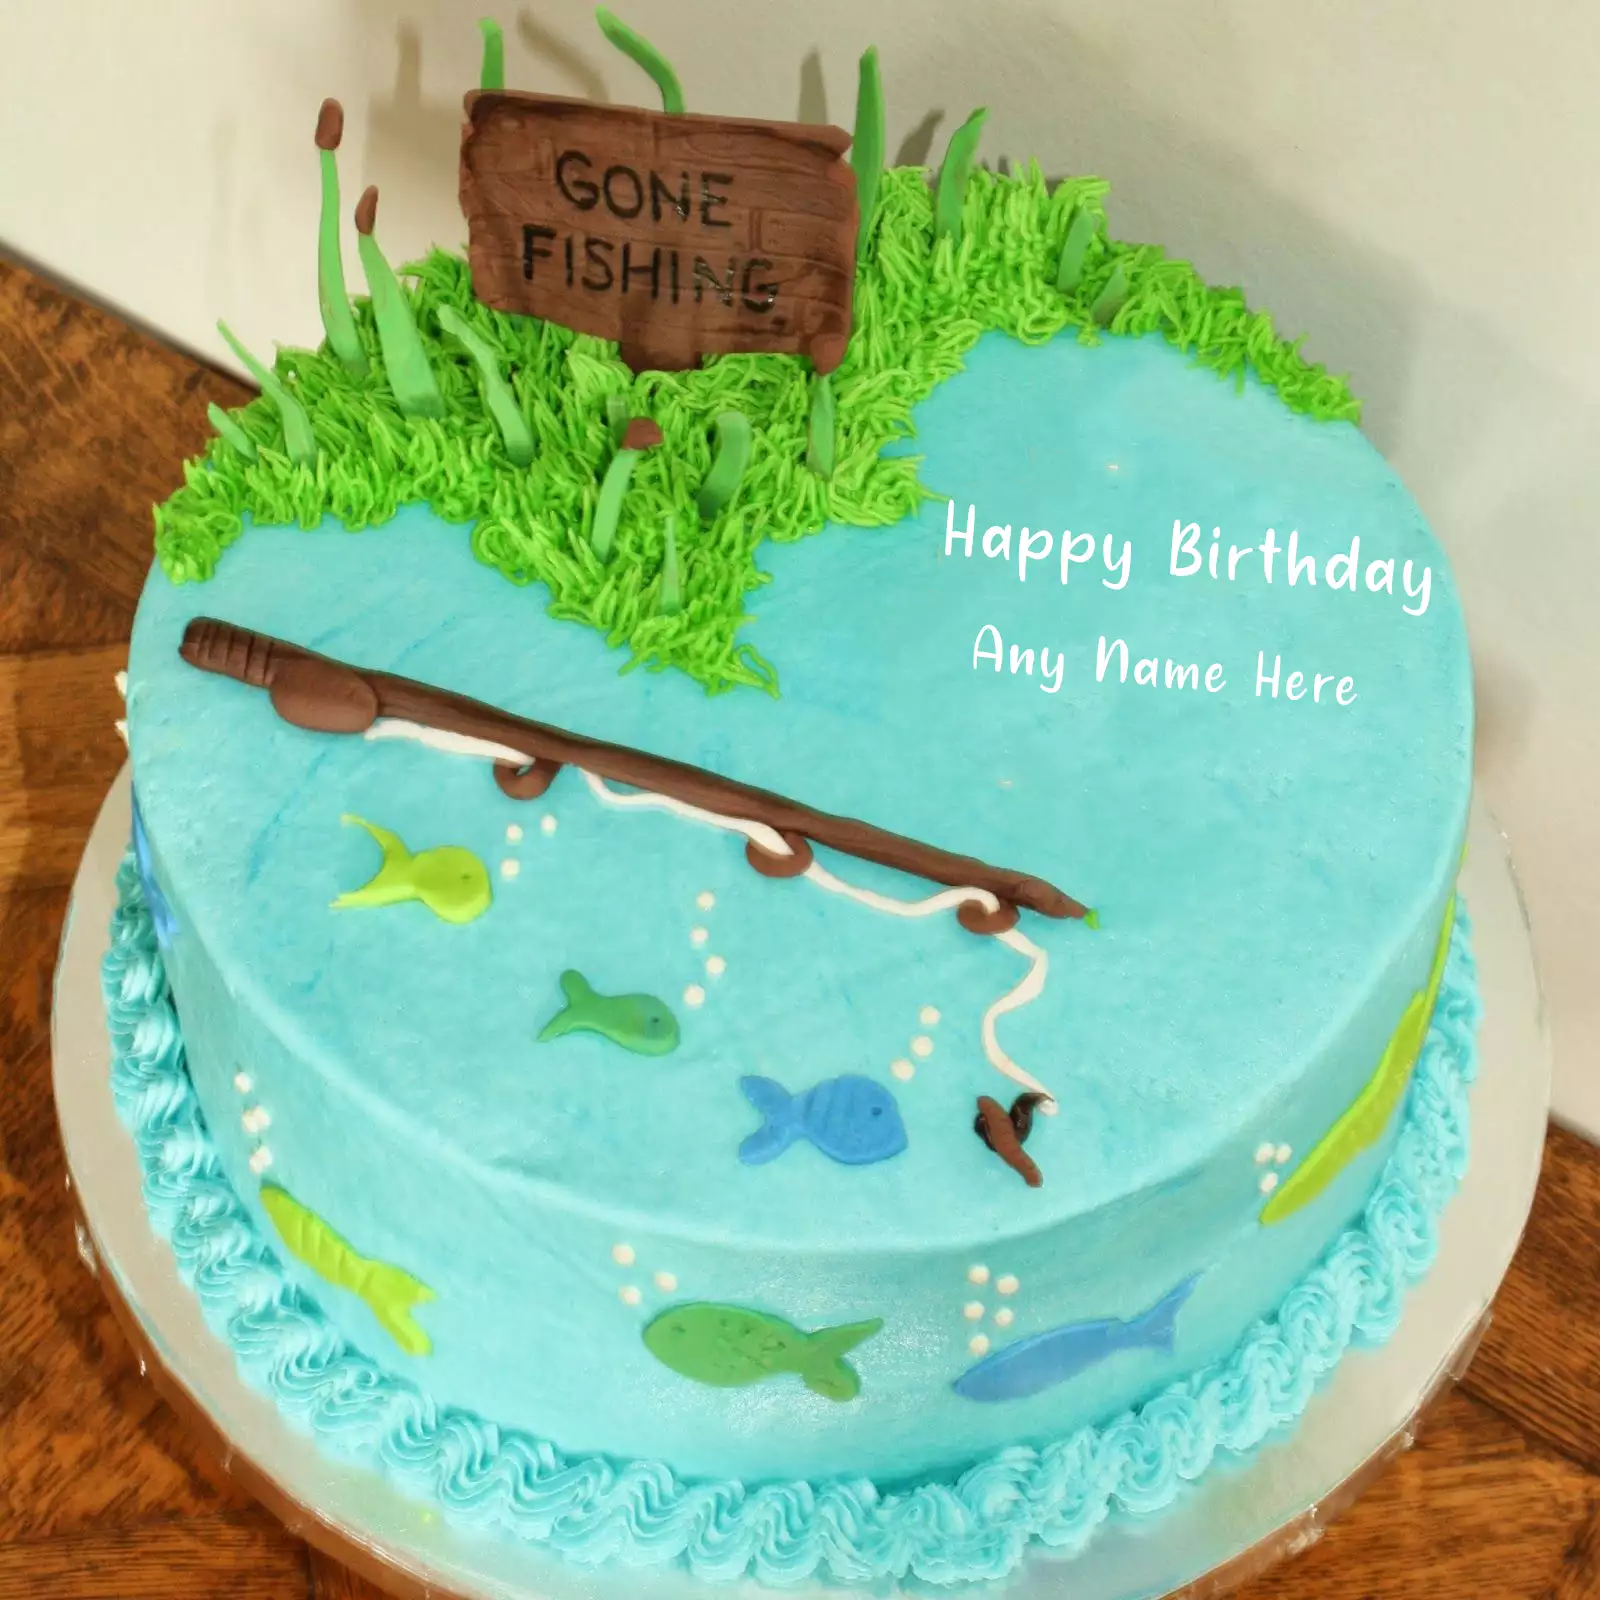 Fishing Cake For Birthday With Name Generator